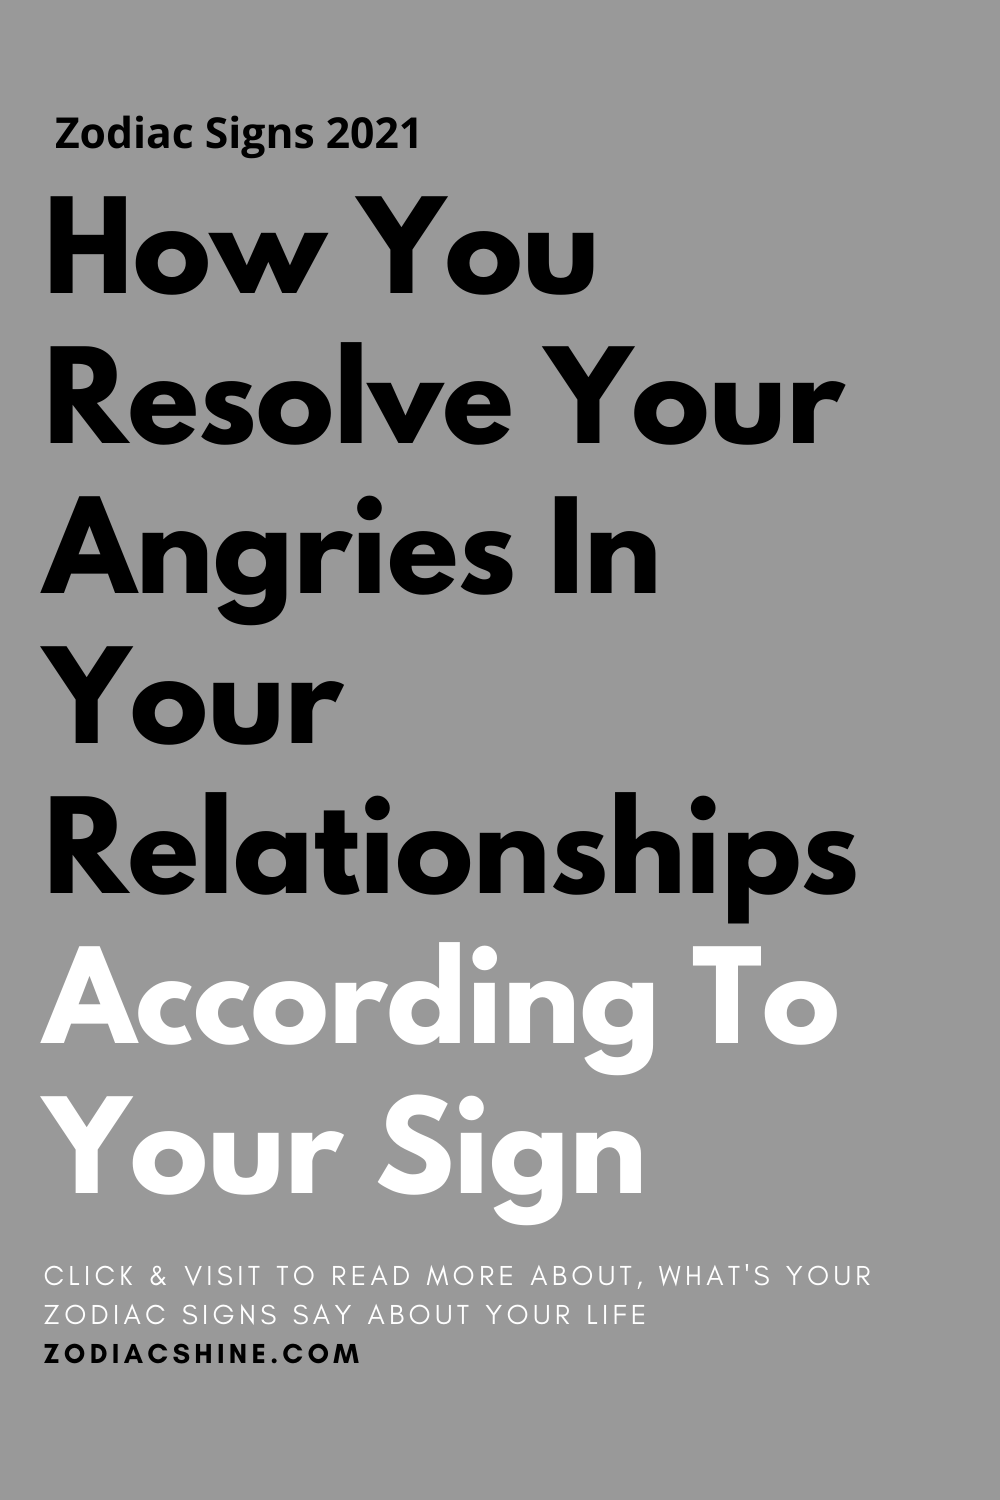 How You Resolve Your Angries In Your Relationships According To Your Sign